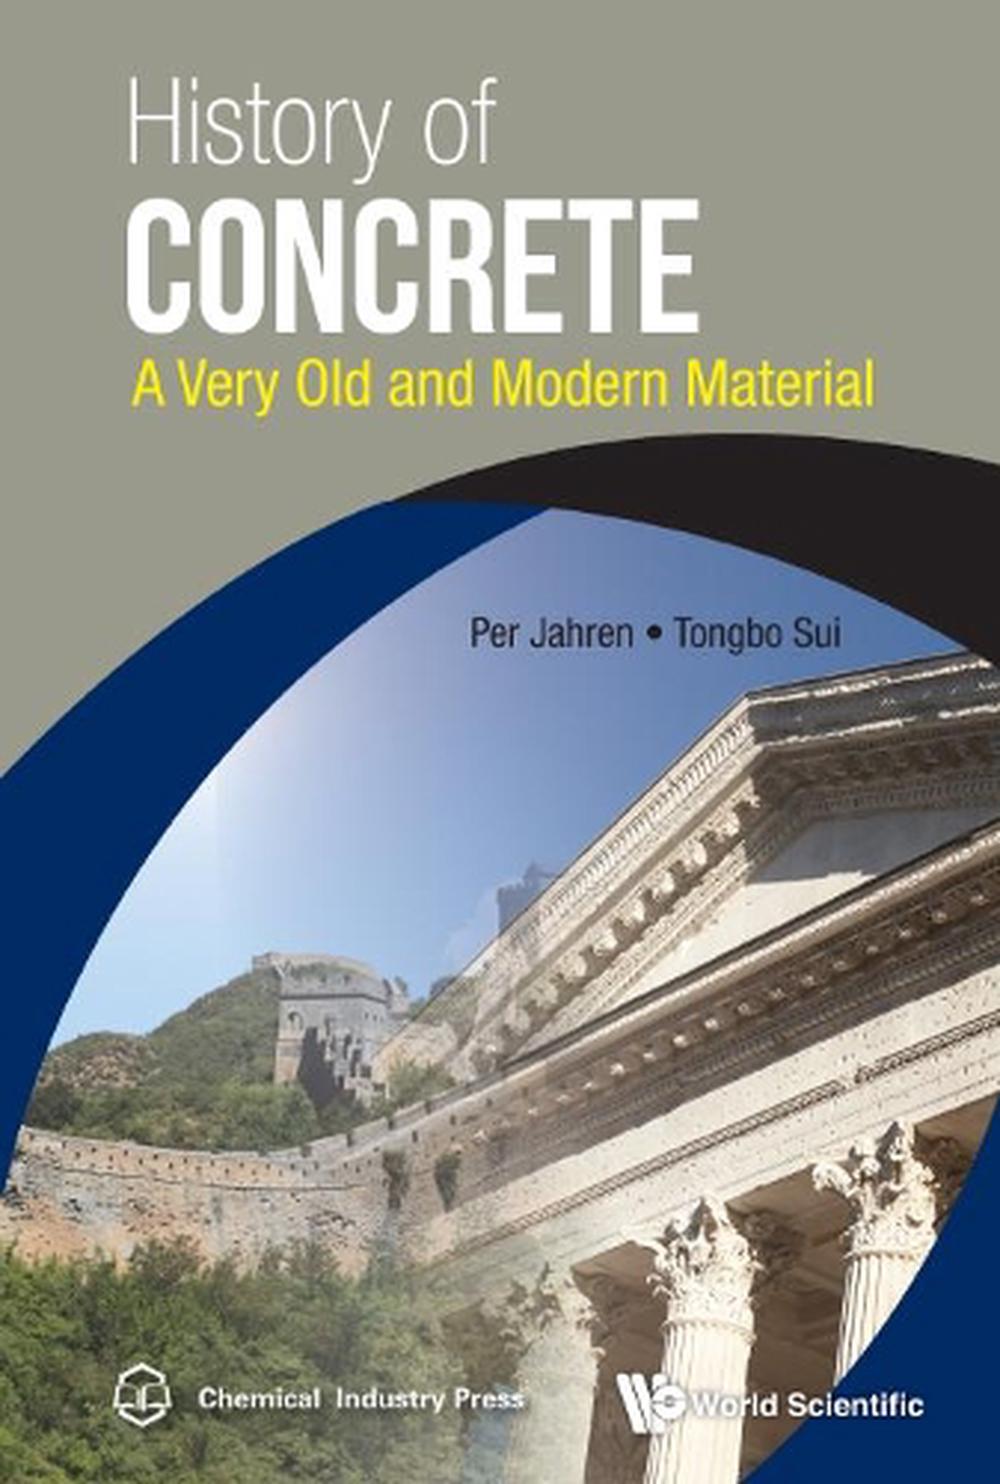 History Of Concrete: A Very Old And Modern Material by Per Jahren